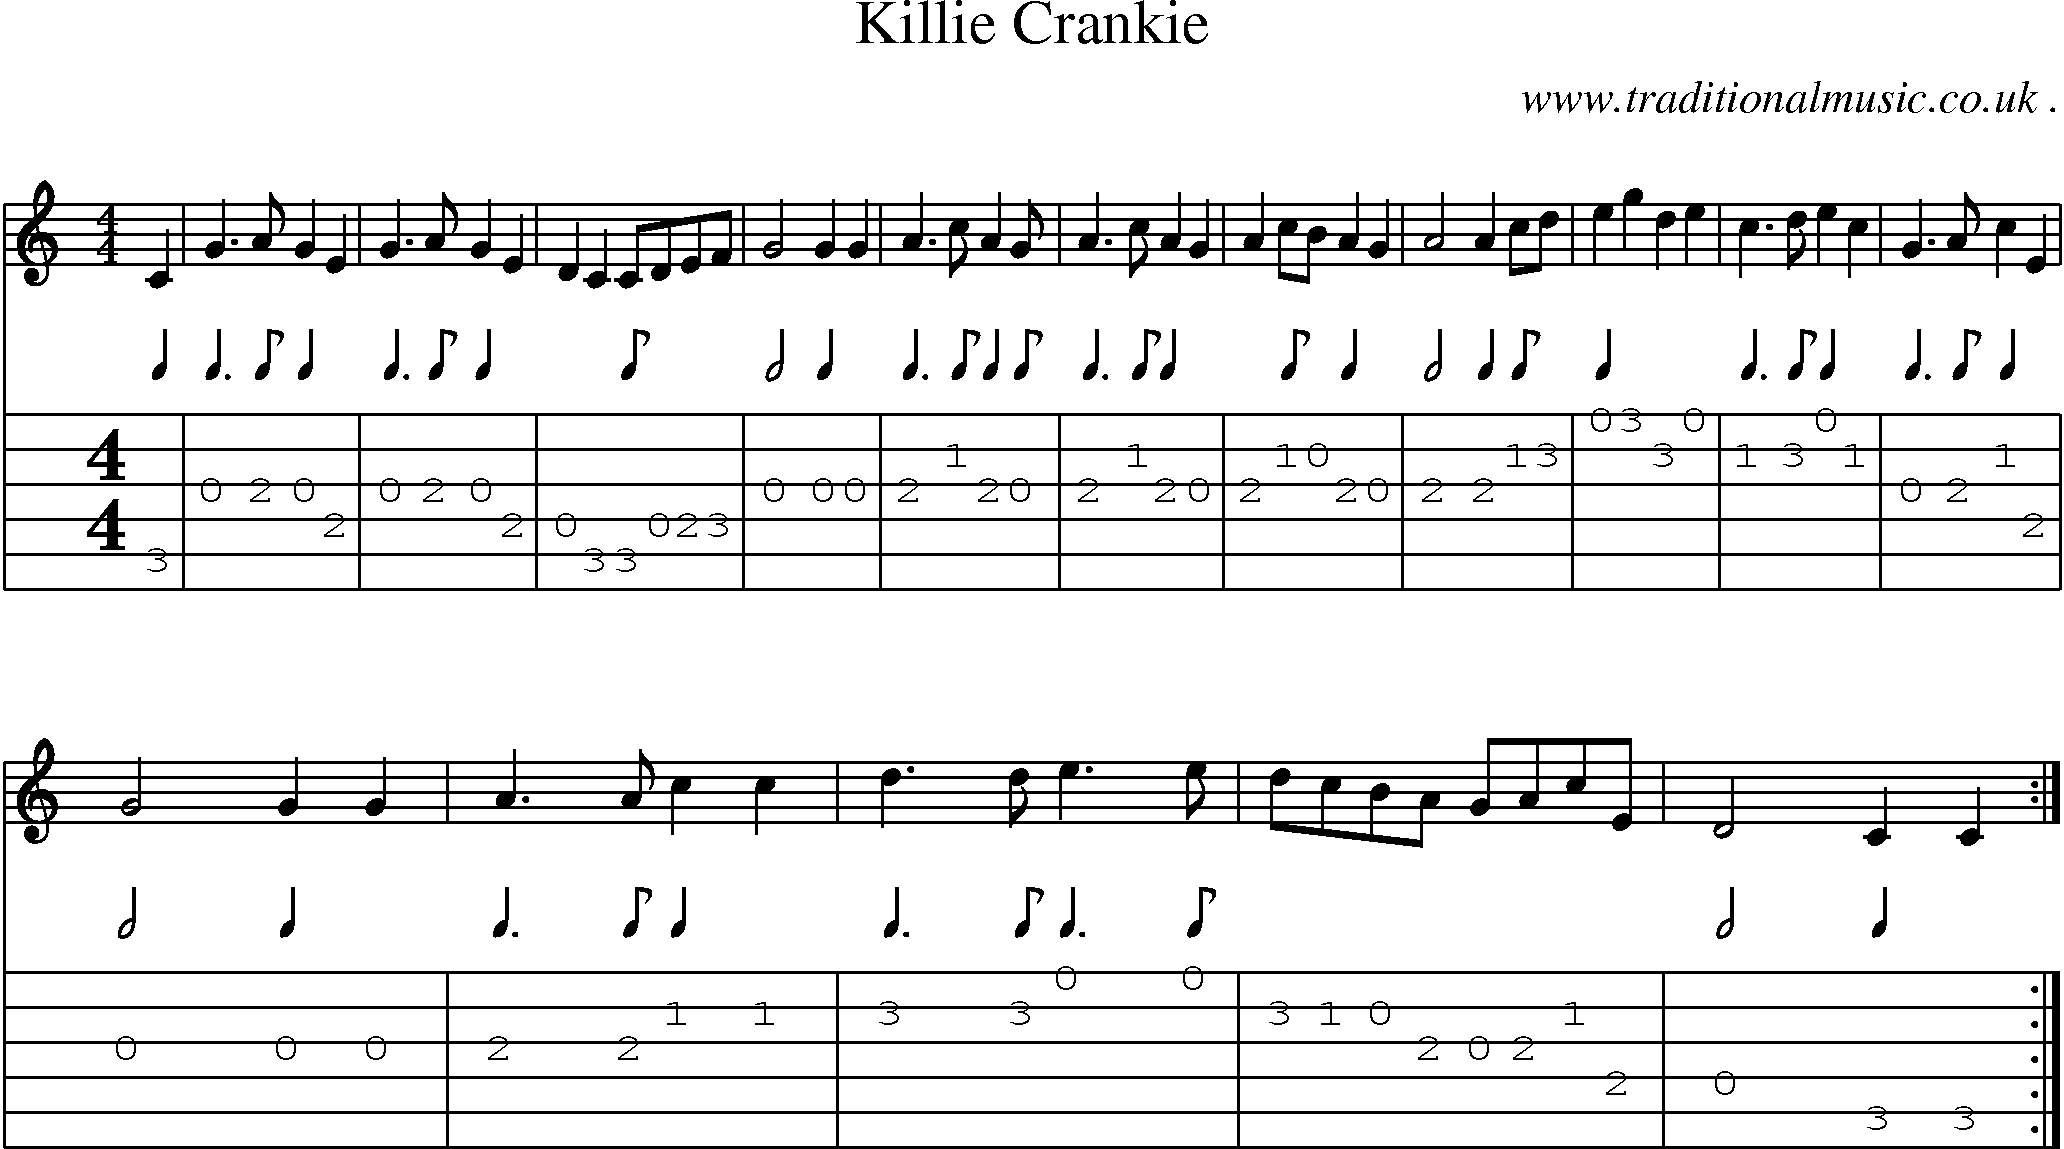 Sheet-Music and Guitar Tabs for Killie Crankie